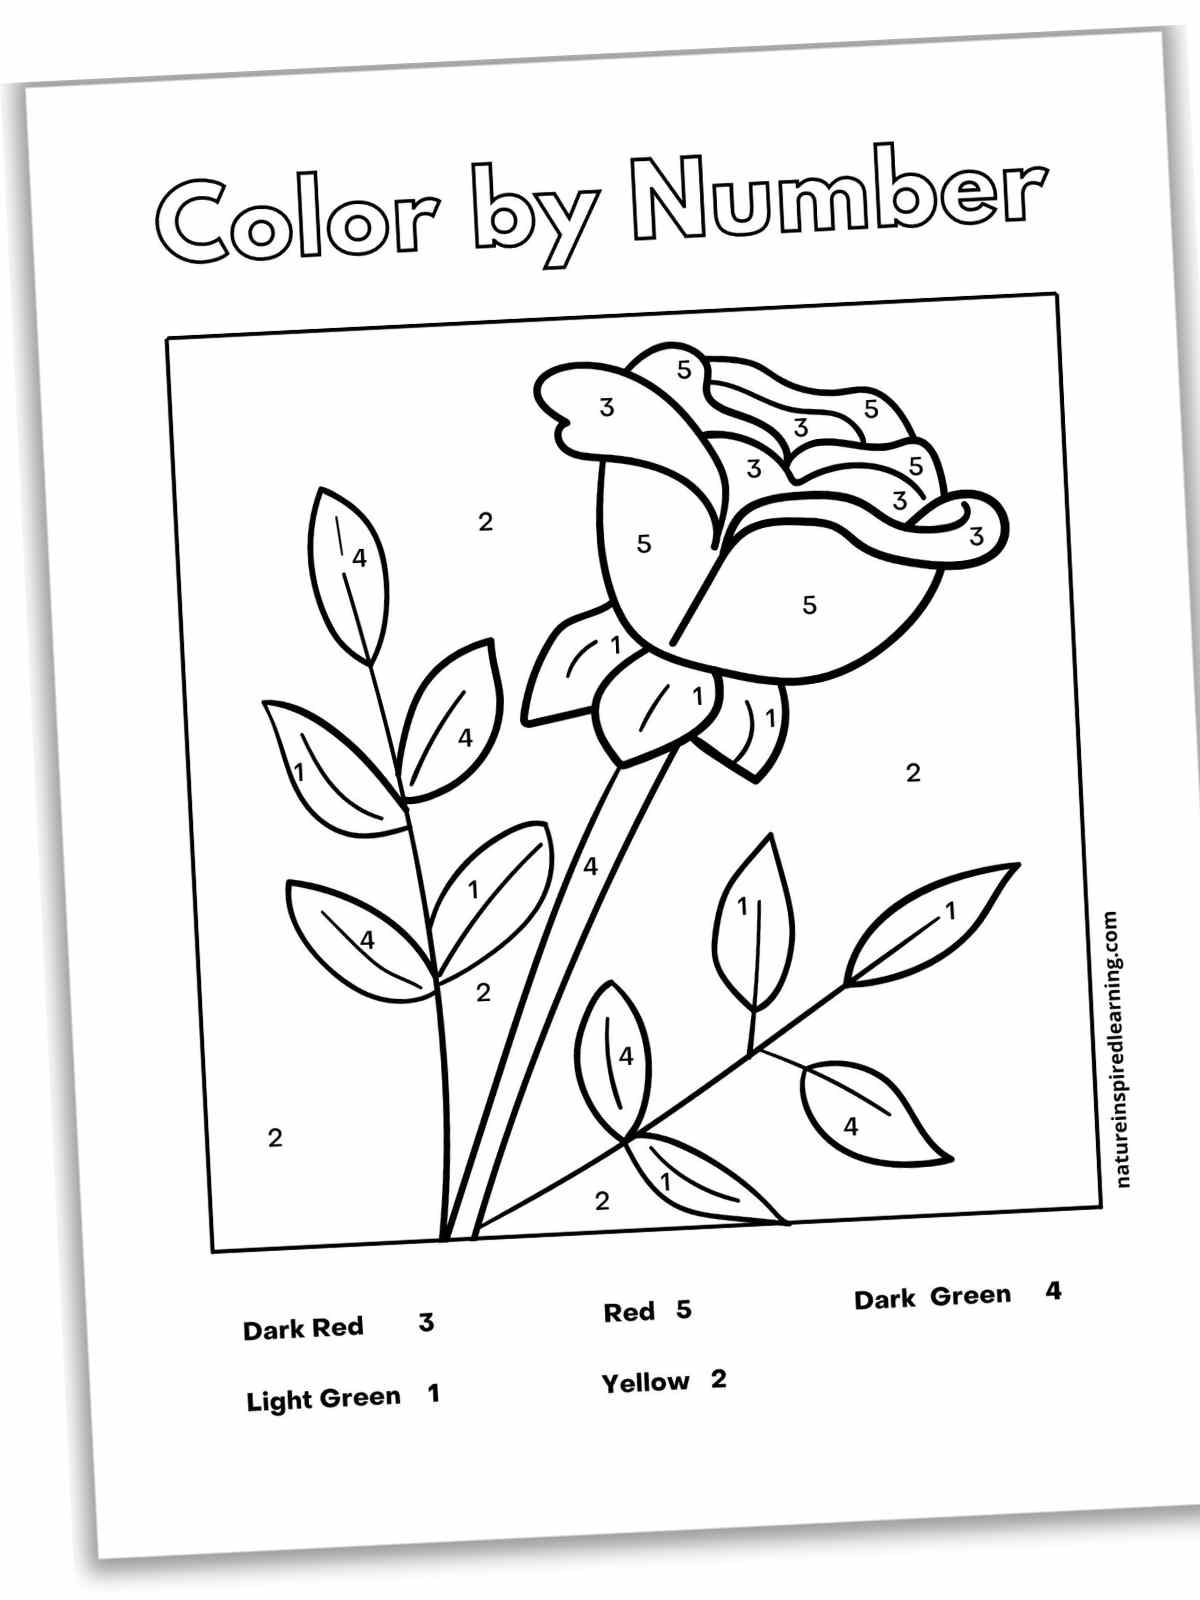 Flower Color by Number - Nature Inspired Learning